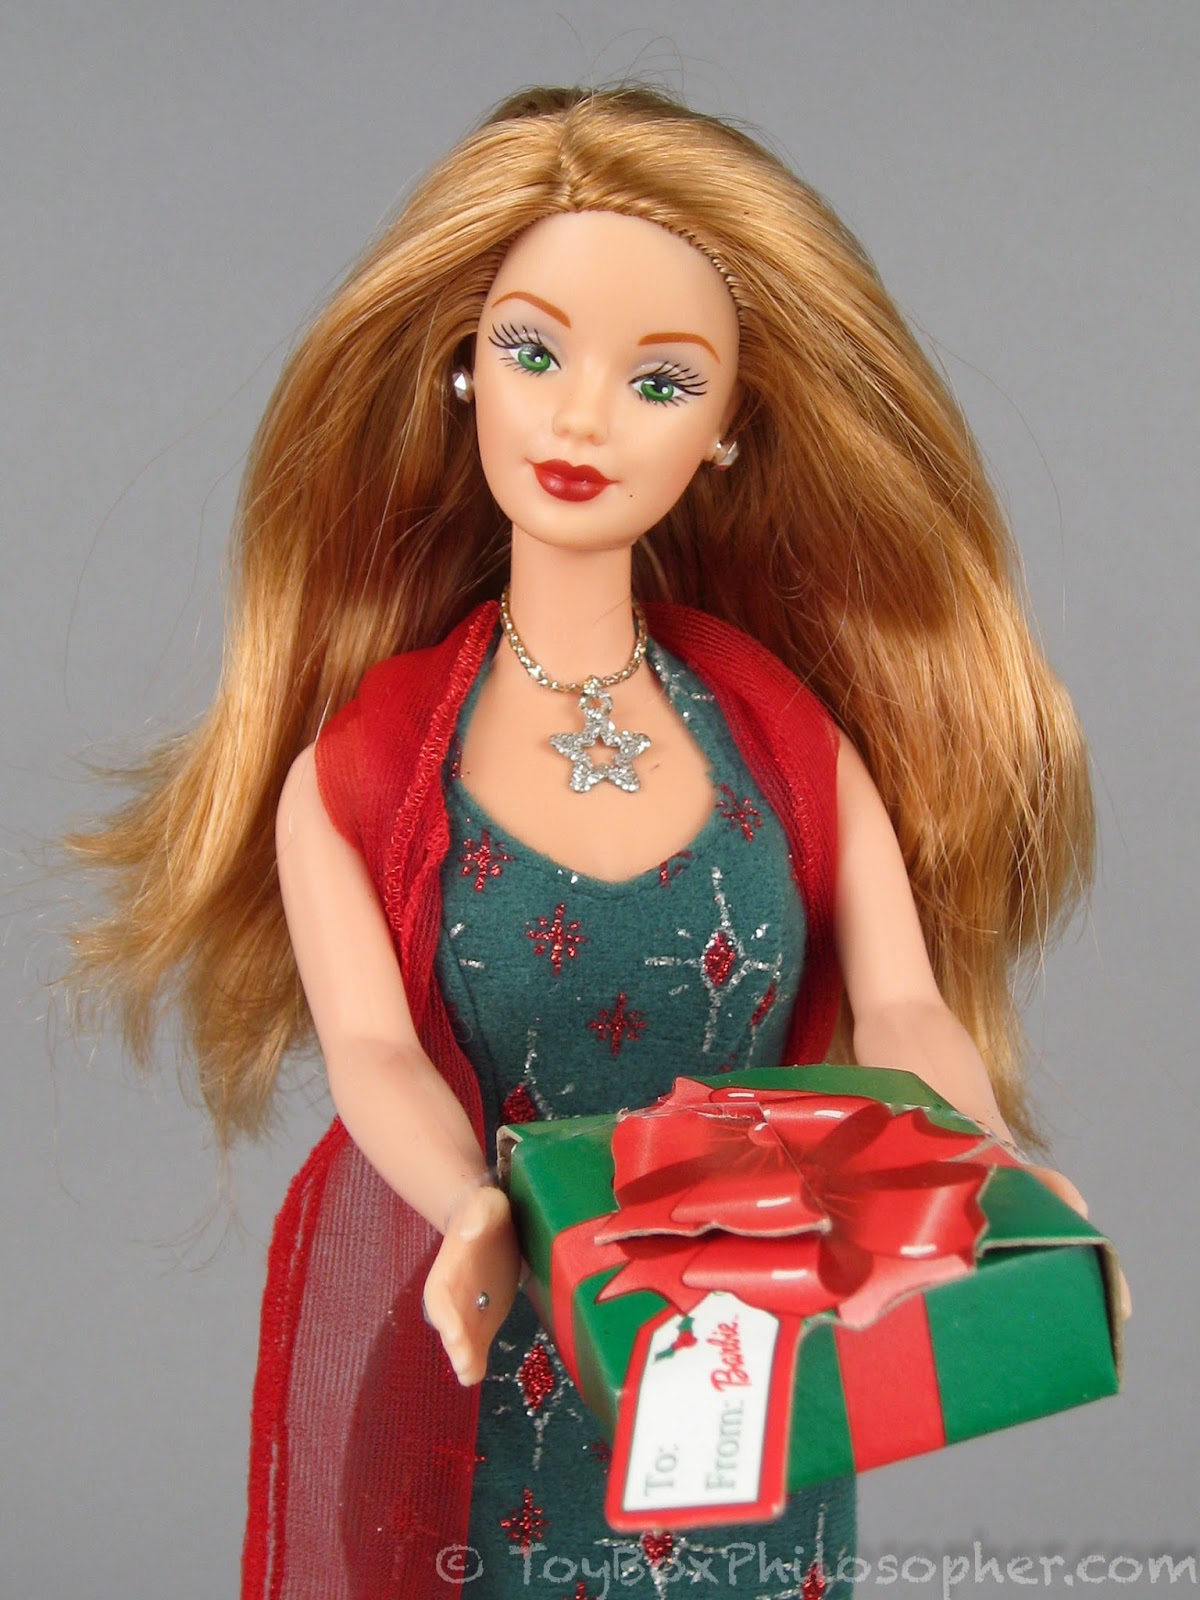 Holiday Surprise 2000 Barbie Doll for sale online.